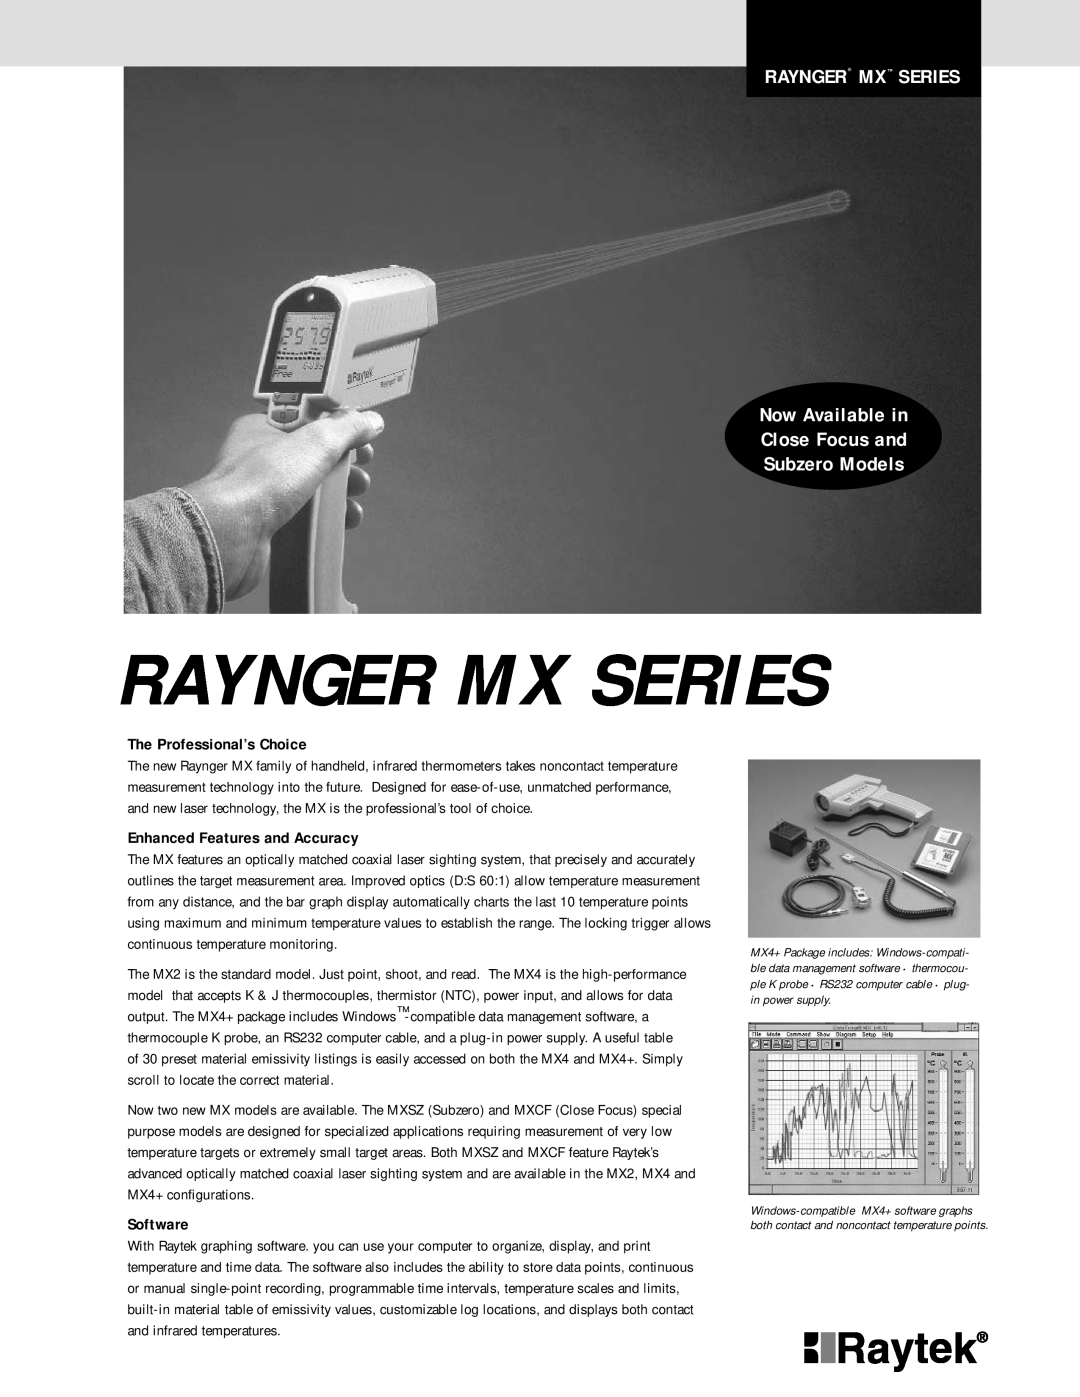 RayTek MX Series manual The Professional’s Choice, Enhanced Features and Accuracy, Software, Raynger Mx Series 